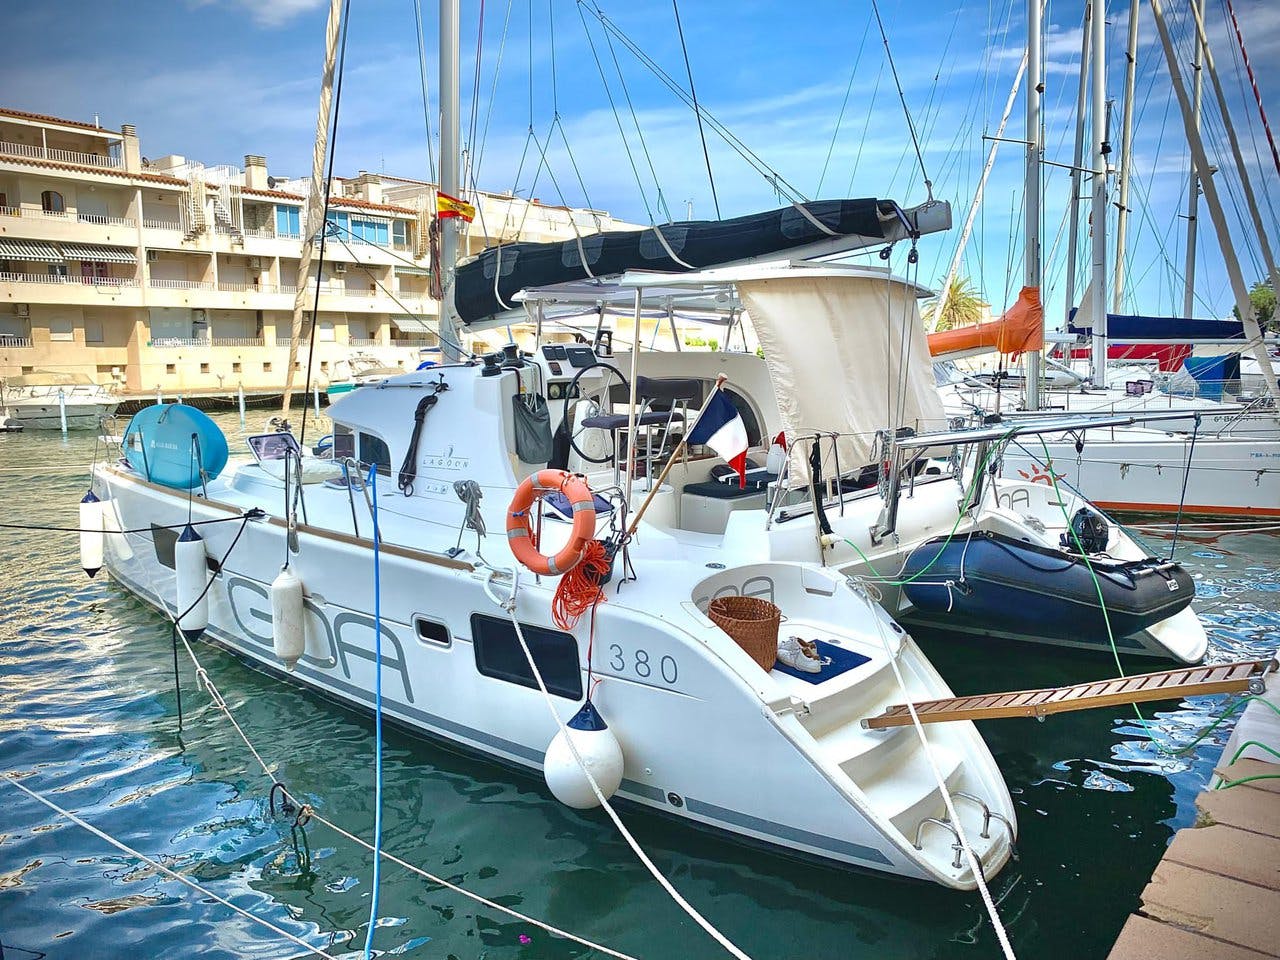 Book Lagoon 380 - 4 cab. Catamaran for bareboat charter in Roses, Empuriabrava marina, Catalonia, Spain with TripYacht!, picture 1